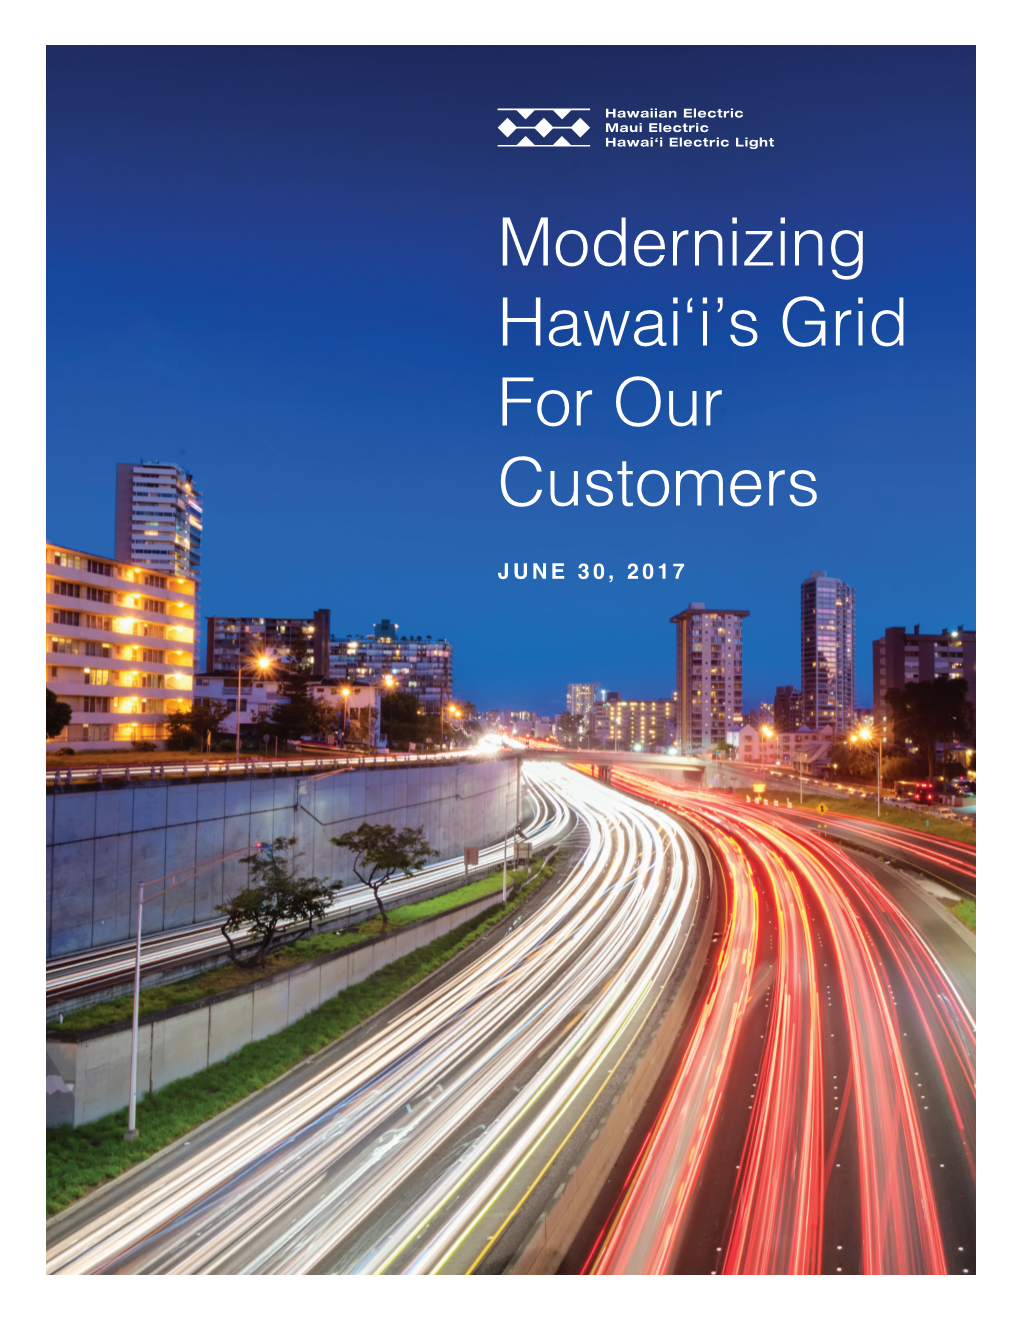 Modernizing Hawai'i's Grid for Our Customers